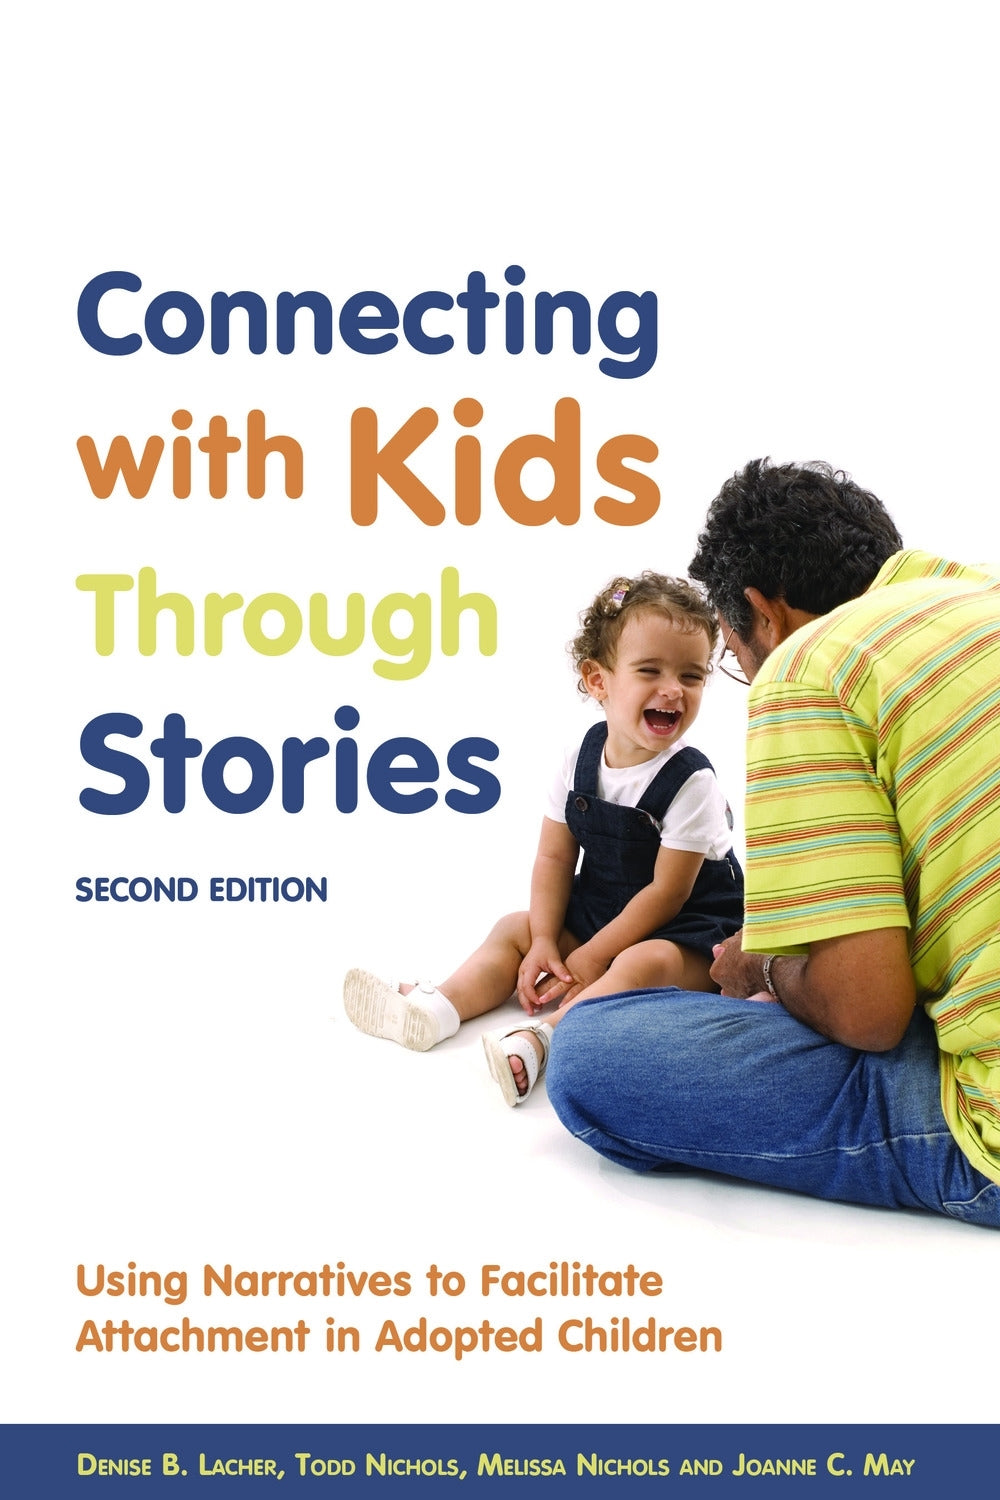 Connecting with Kids Through Stories by Todd Nichols, Denise B. Lacher, Melissa Nichols, Joanne C. May